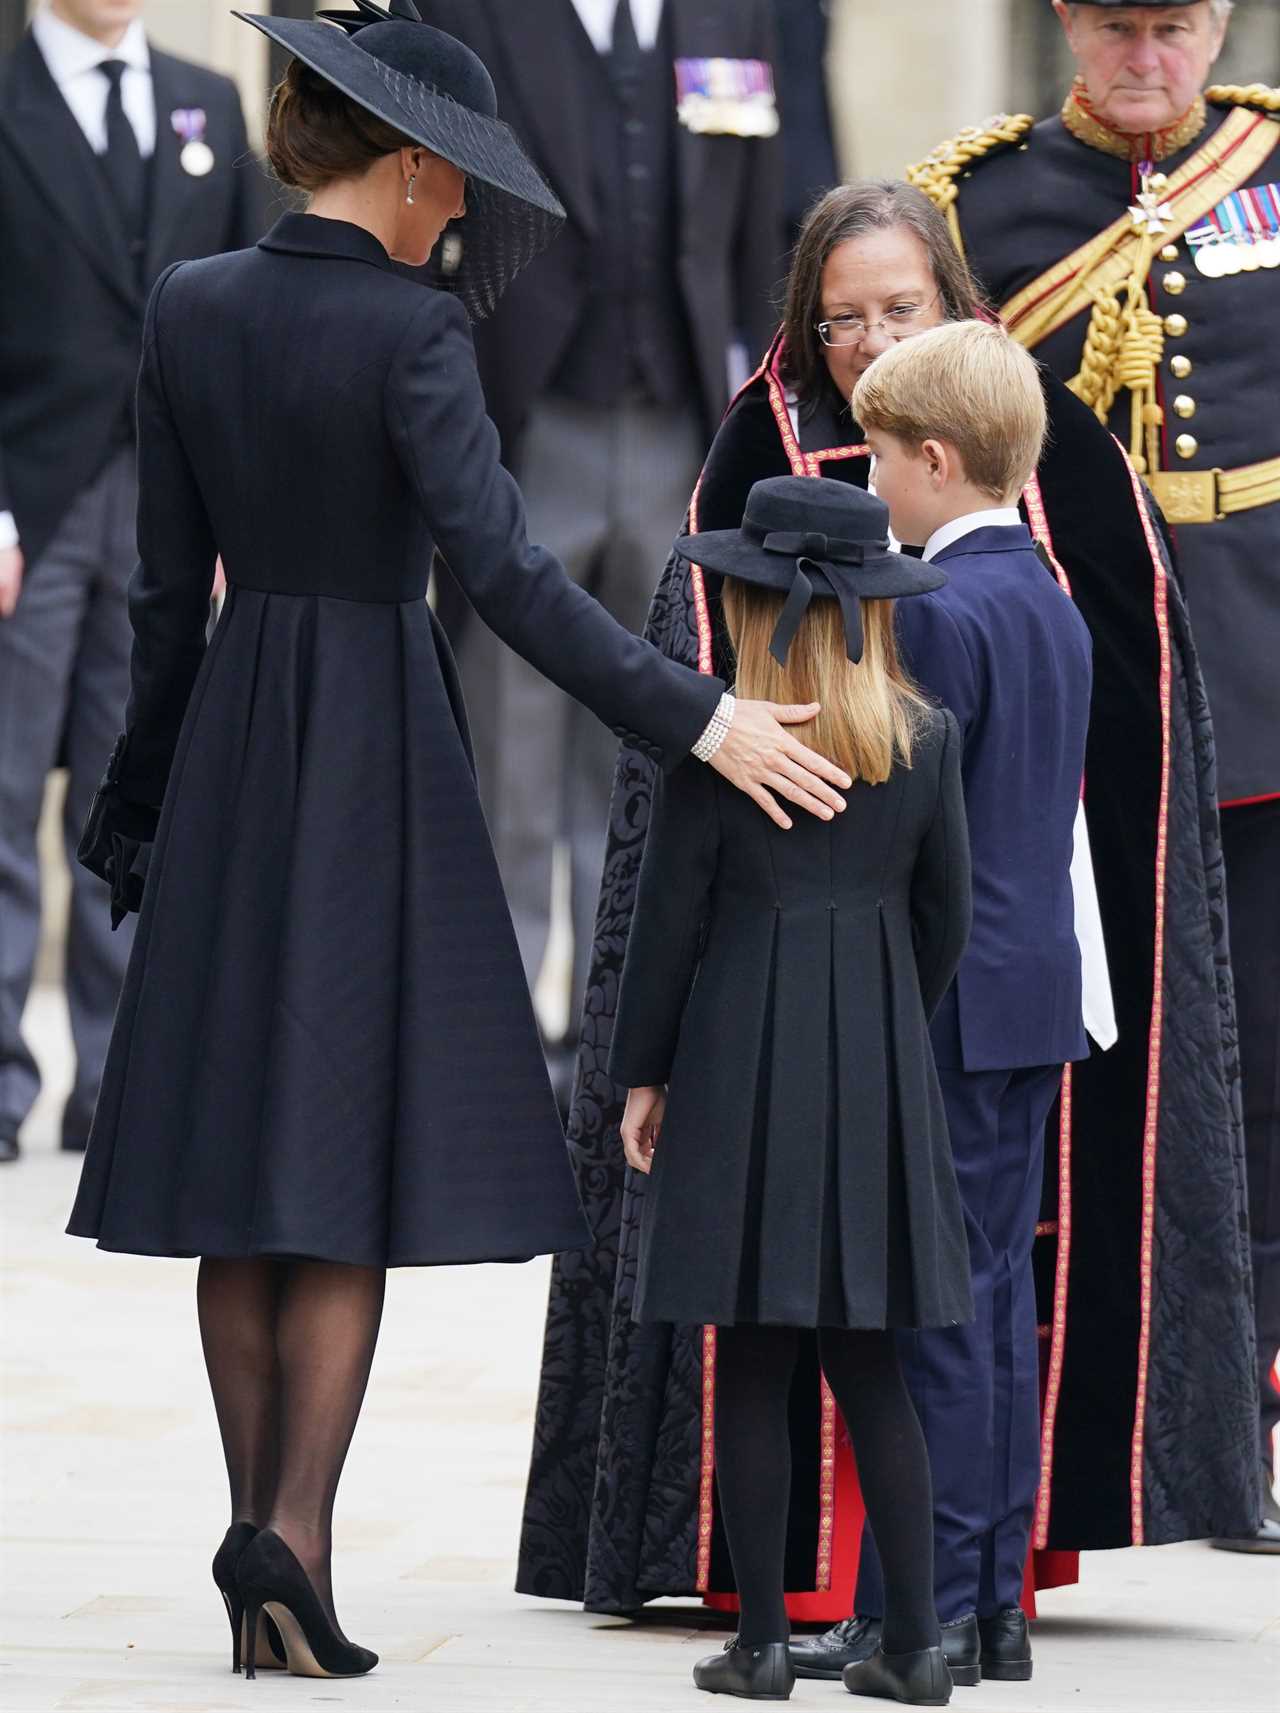 Sweet moment between Kate & Princess Charlotte at Queen’s funeral spoke volumes about her as mum, says parenting expert